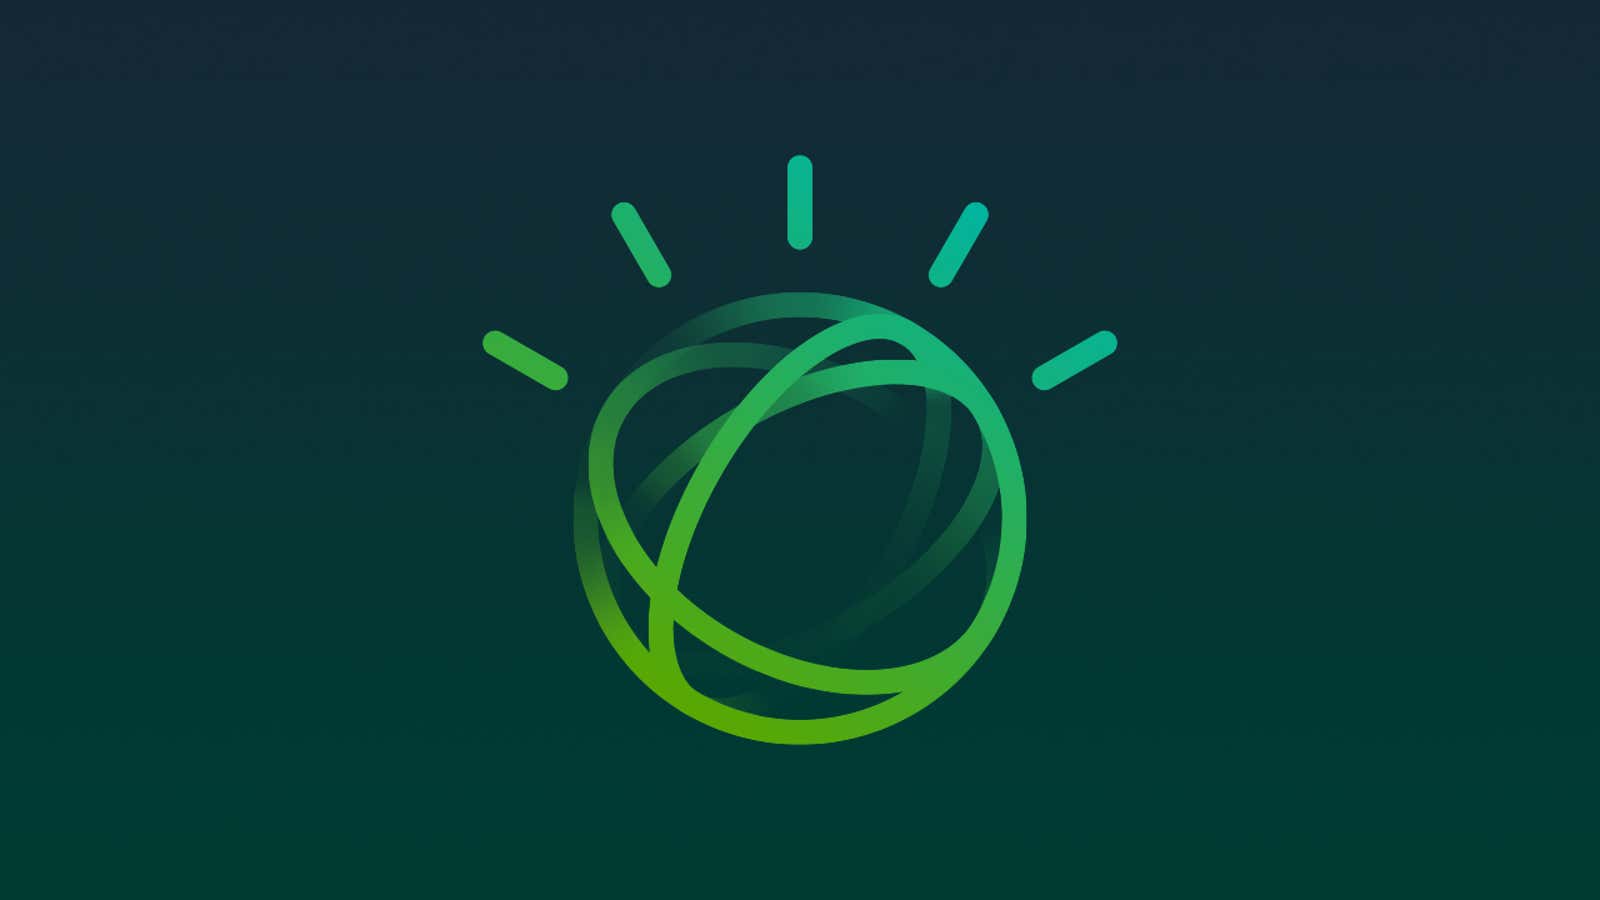 IBM Watson understands, reasons, and learns to work with humans to power innovative solutions across industries